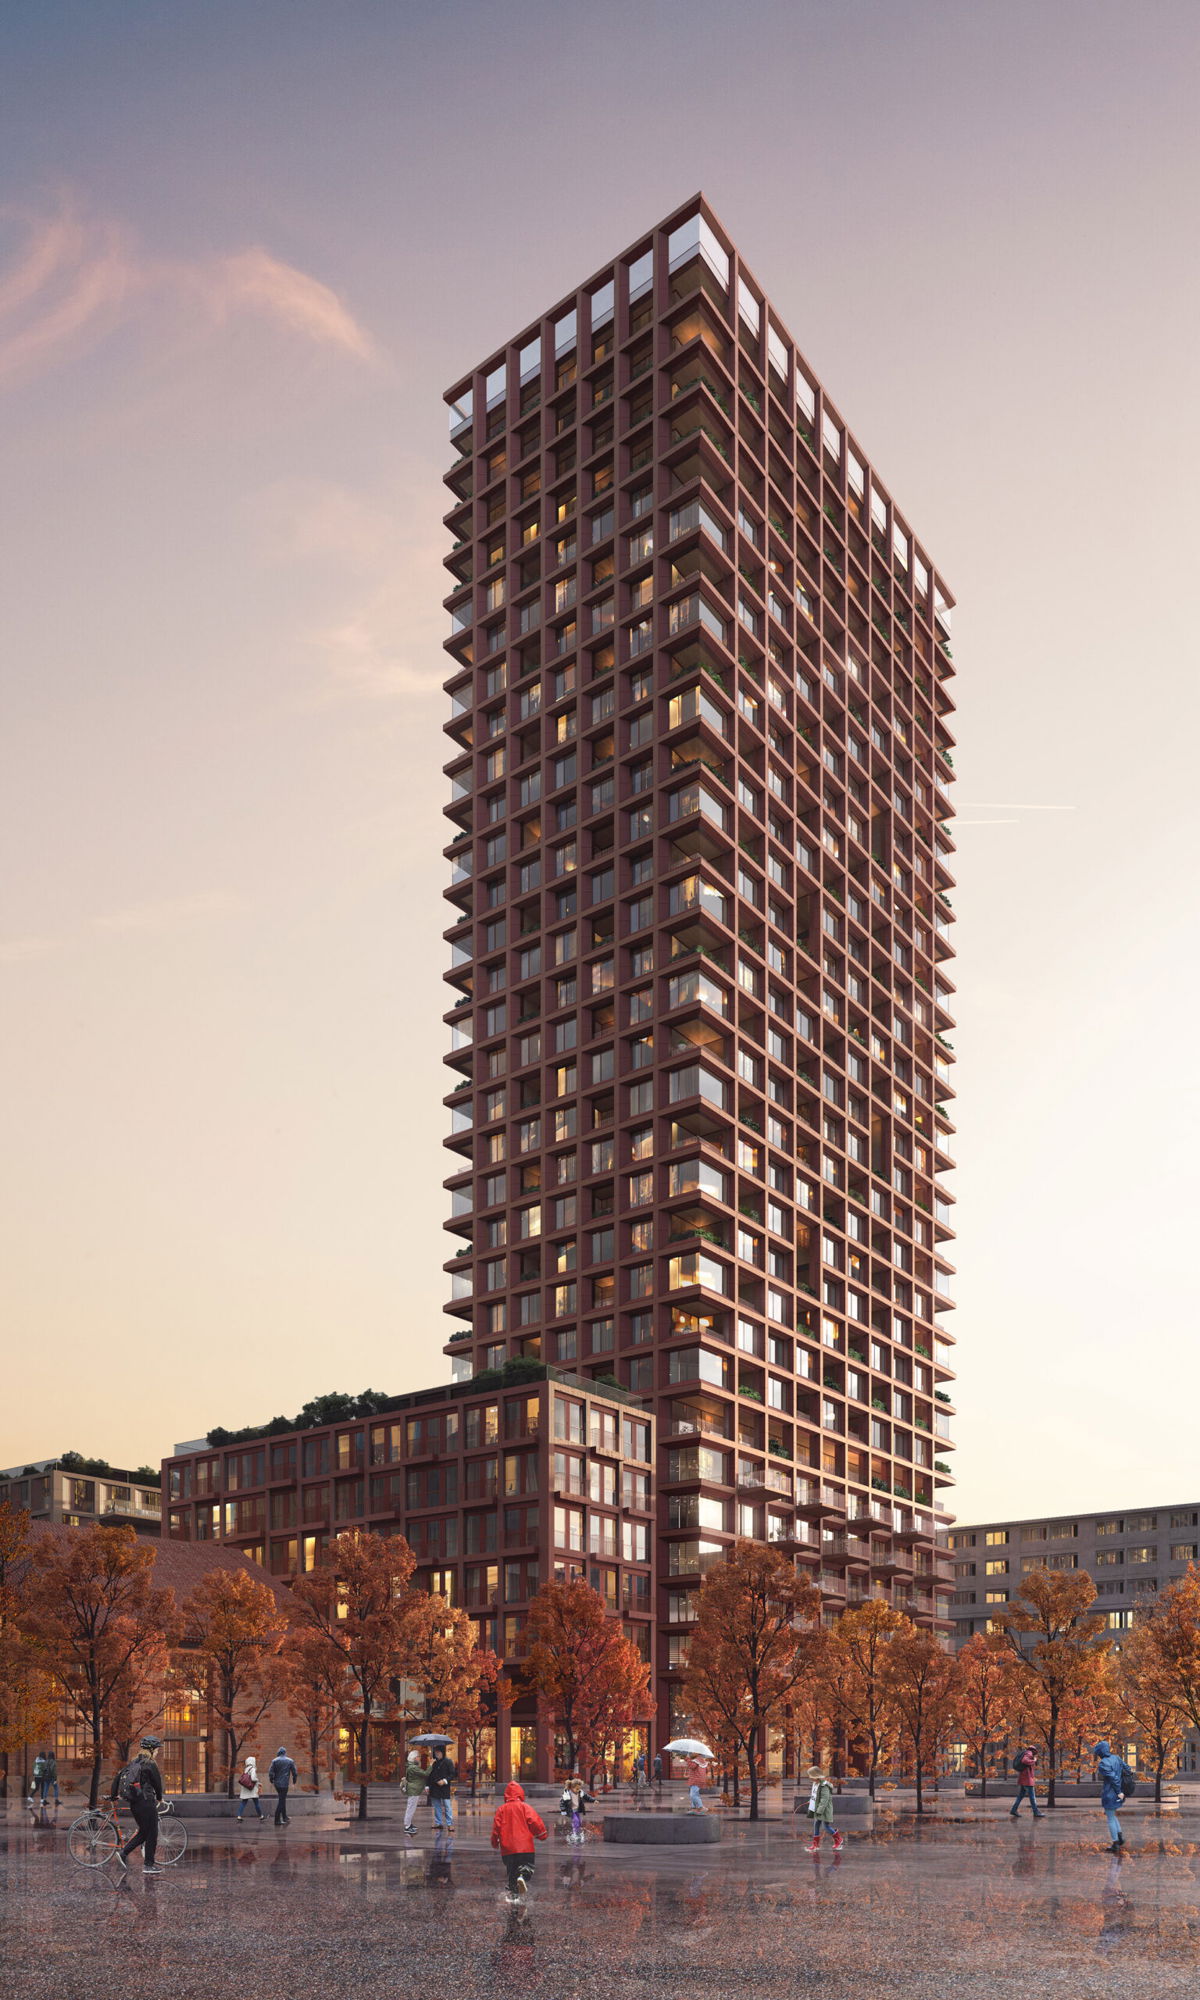 <i>Aesthetica Studio/Schmidt Hammer Lassen Architects</i><br/>The 100-meter-tall construction will follow a system which replaces a concrete core with wood.